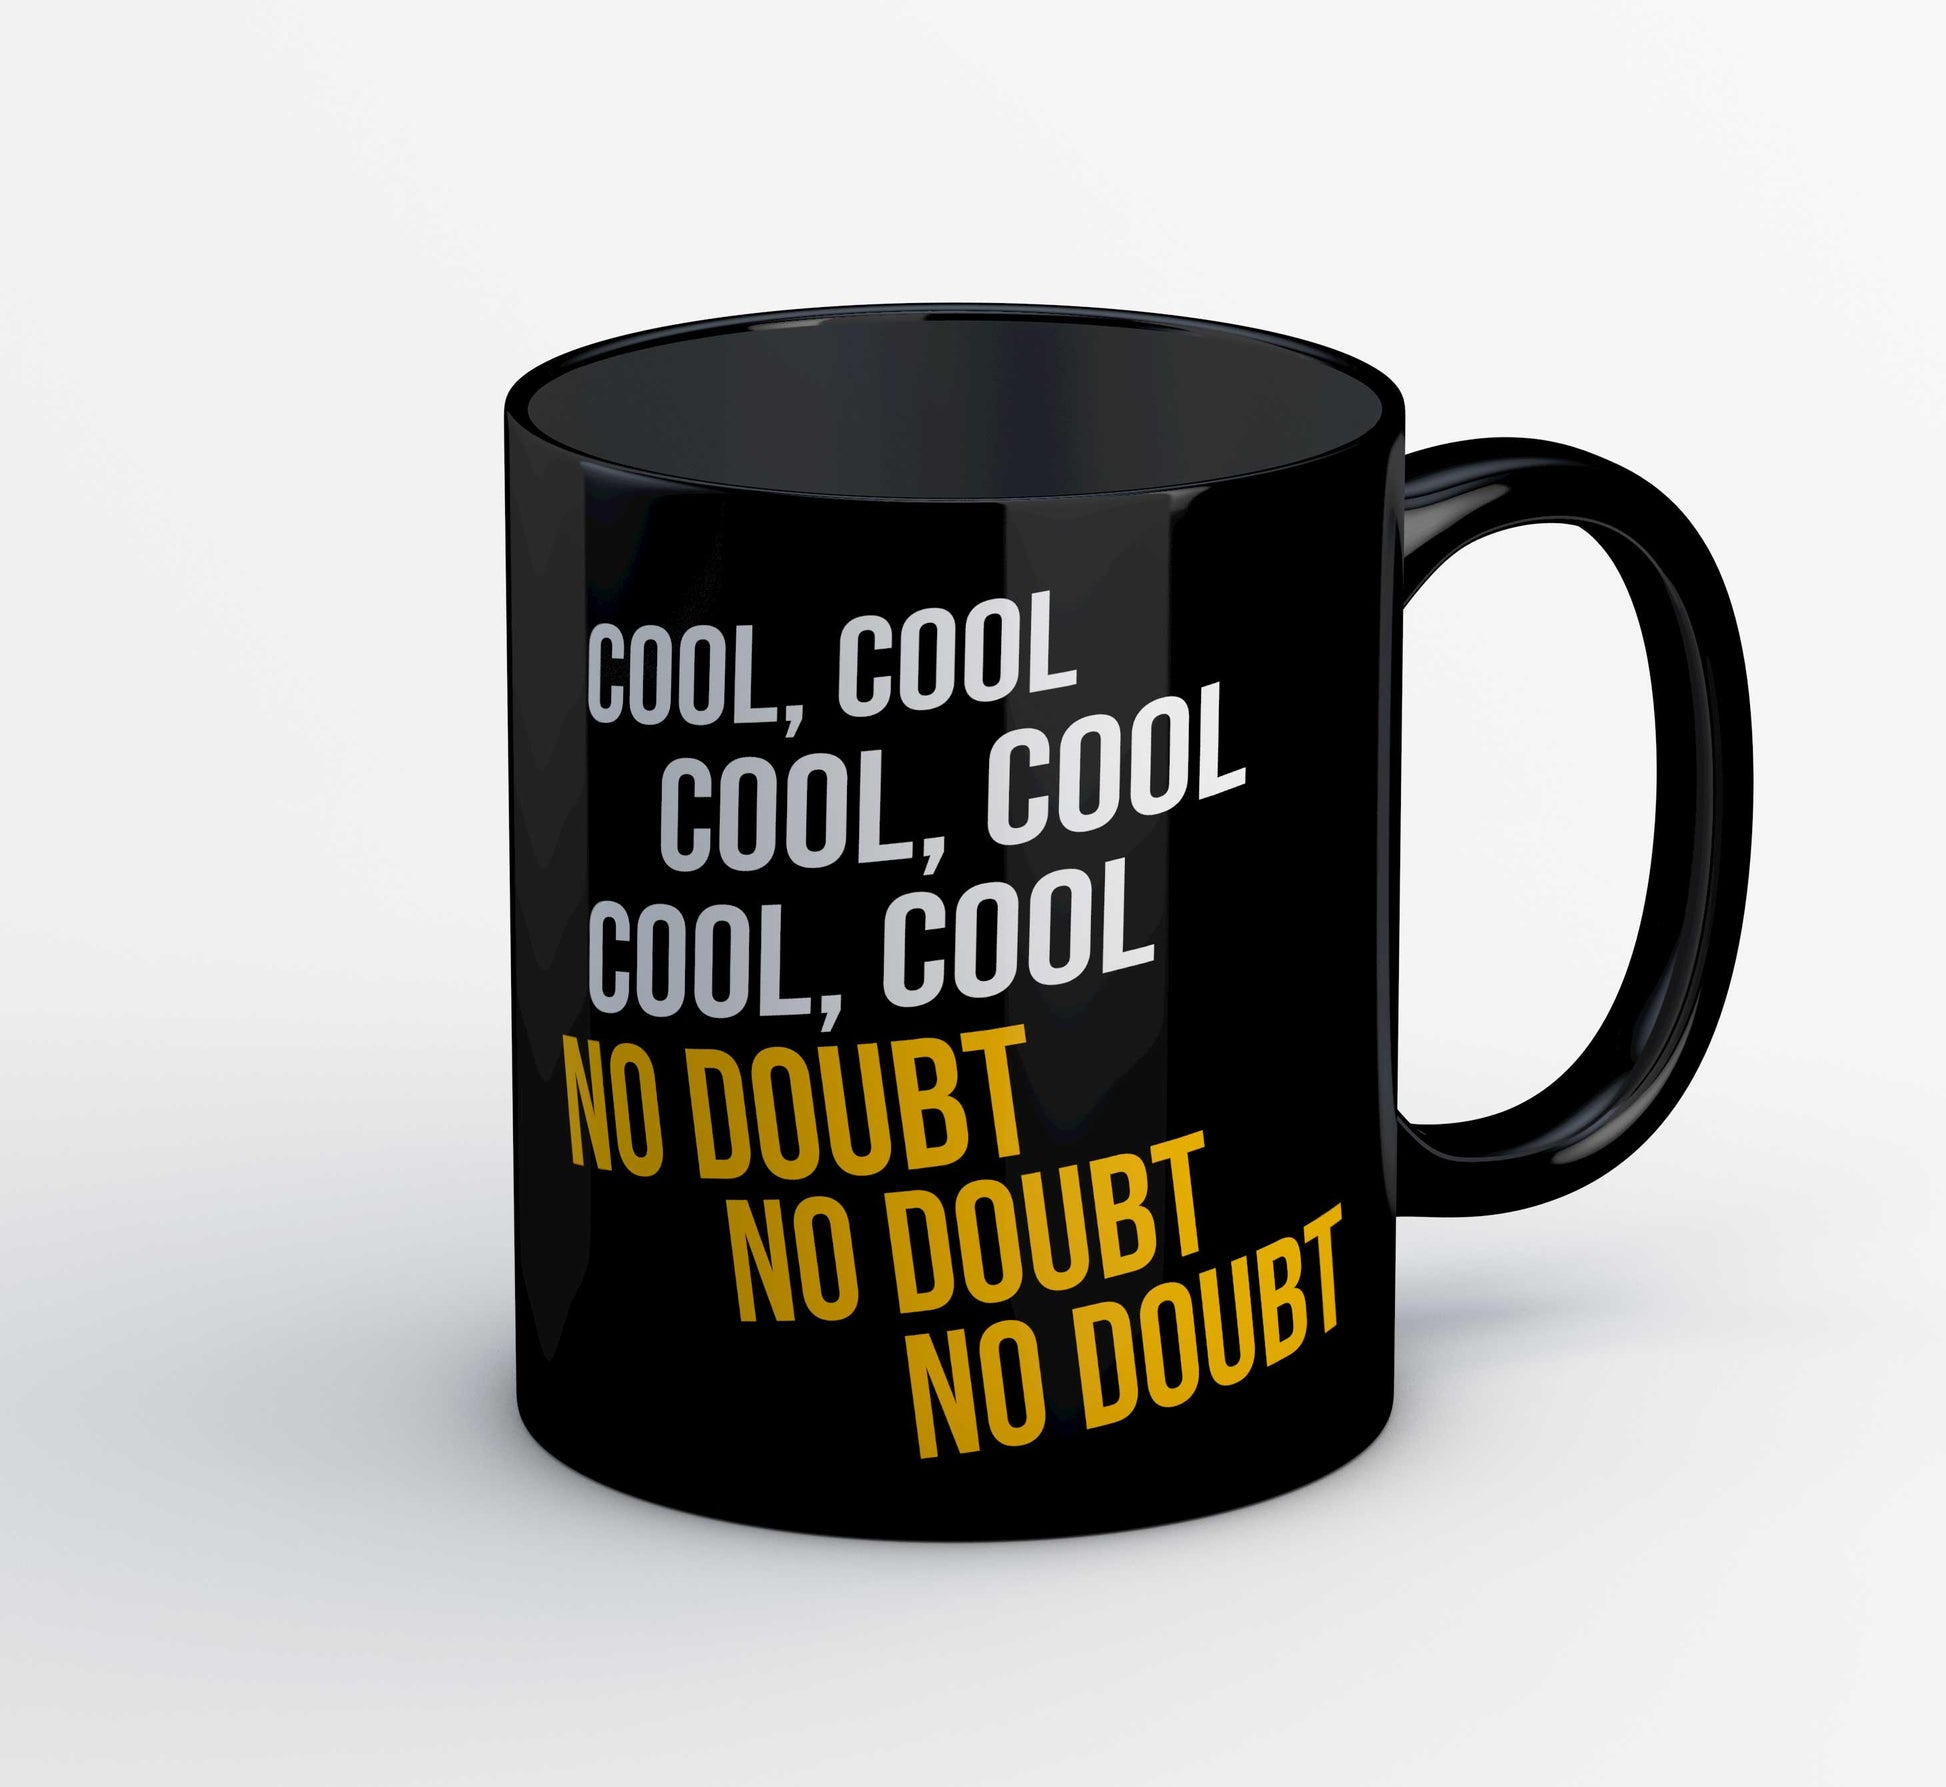 brooklyn nine-nine cool cool cool no doubt no doubt no doubt mug coffee ceramic buy online india the banyan tee tbt men women girls boys unisex  detective jake peralta terry charles boyle gina linetti andy samberg merchandise clothing acceessories